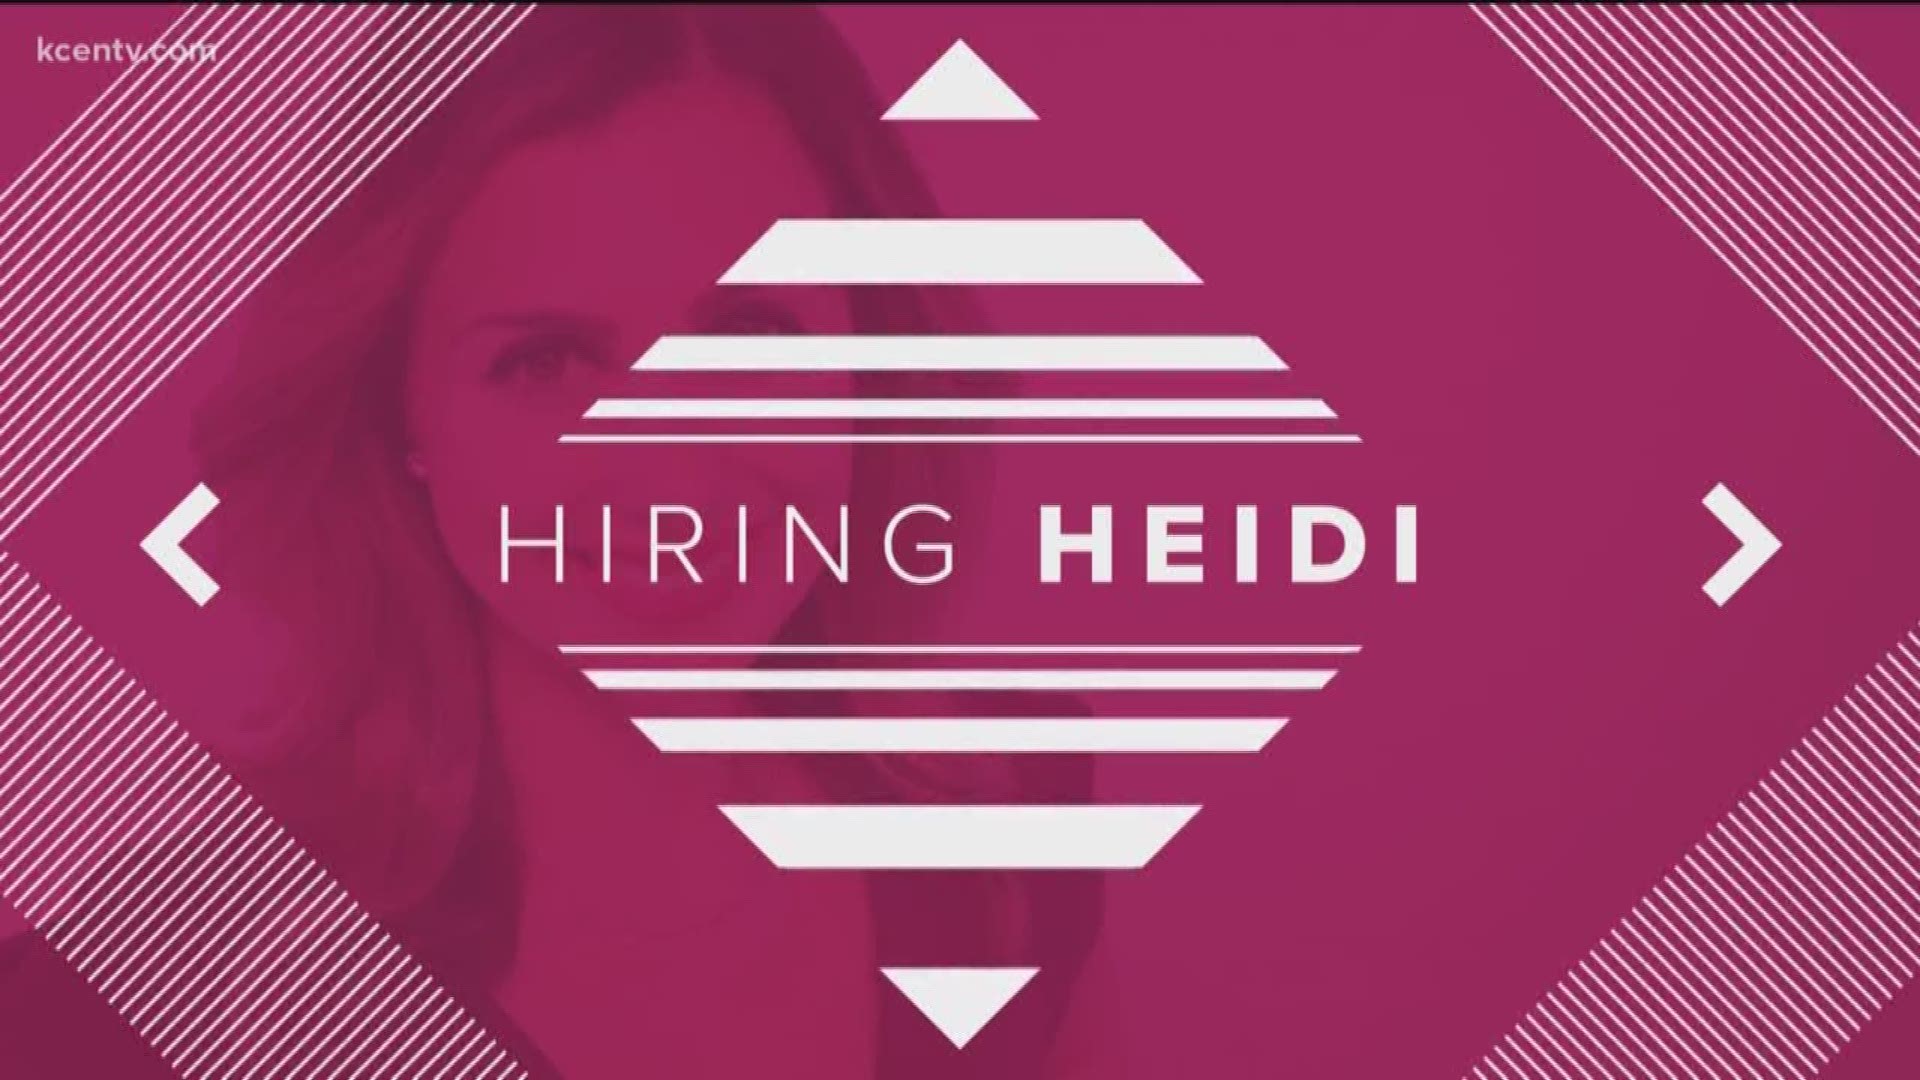 This week in Hiring Heidi, our fun loving host tries her hand at being a chef.